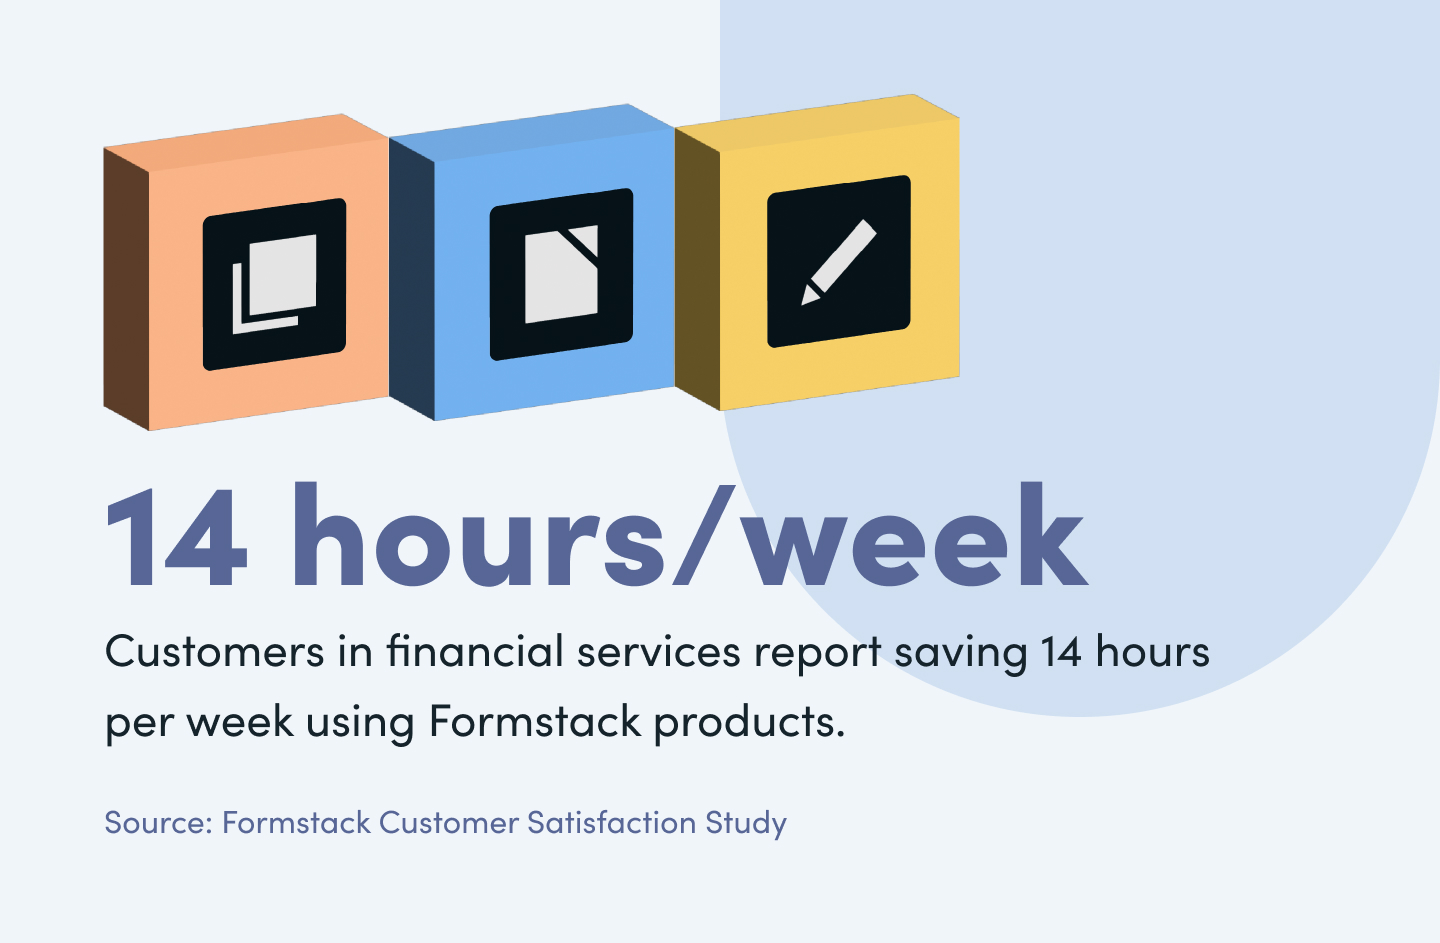 Customers in financial services report saving 14 hours per week using Formstack products.